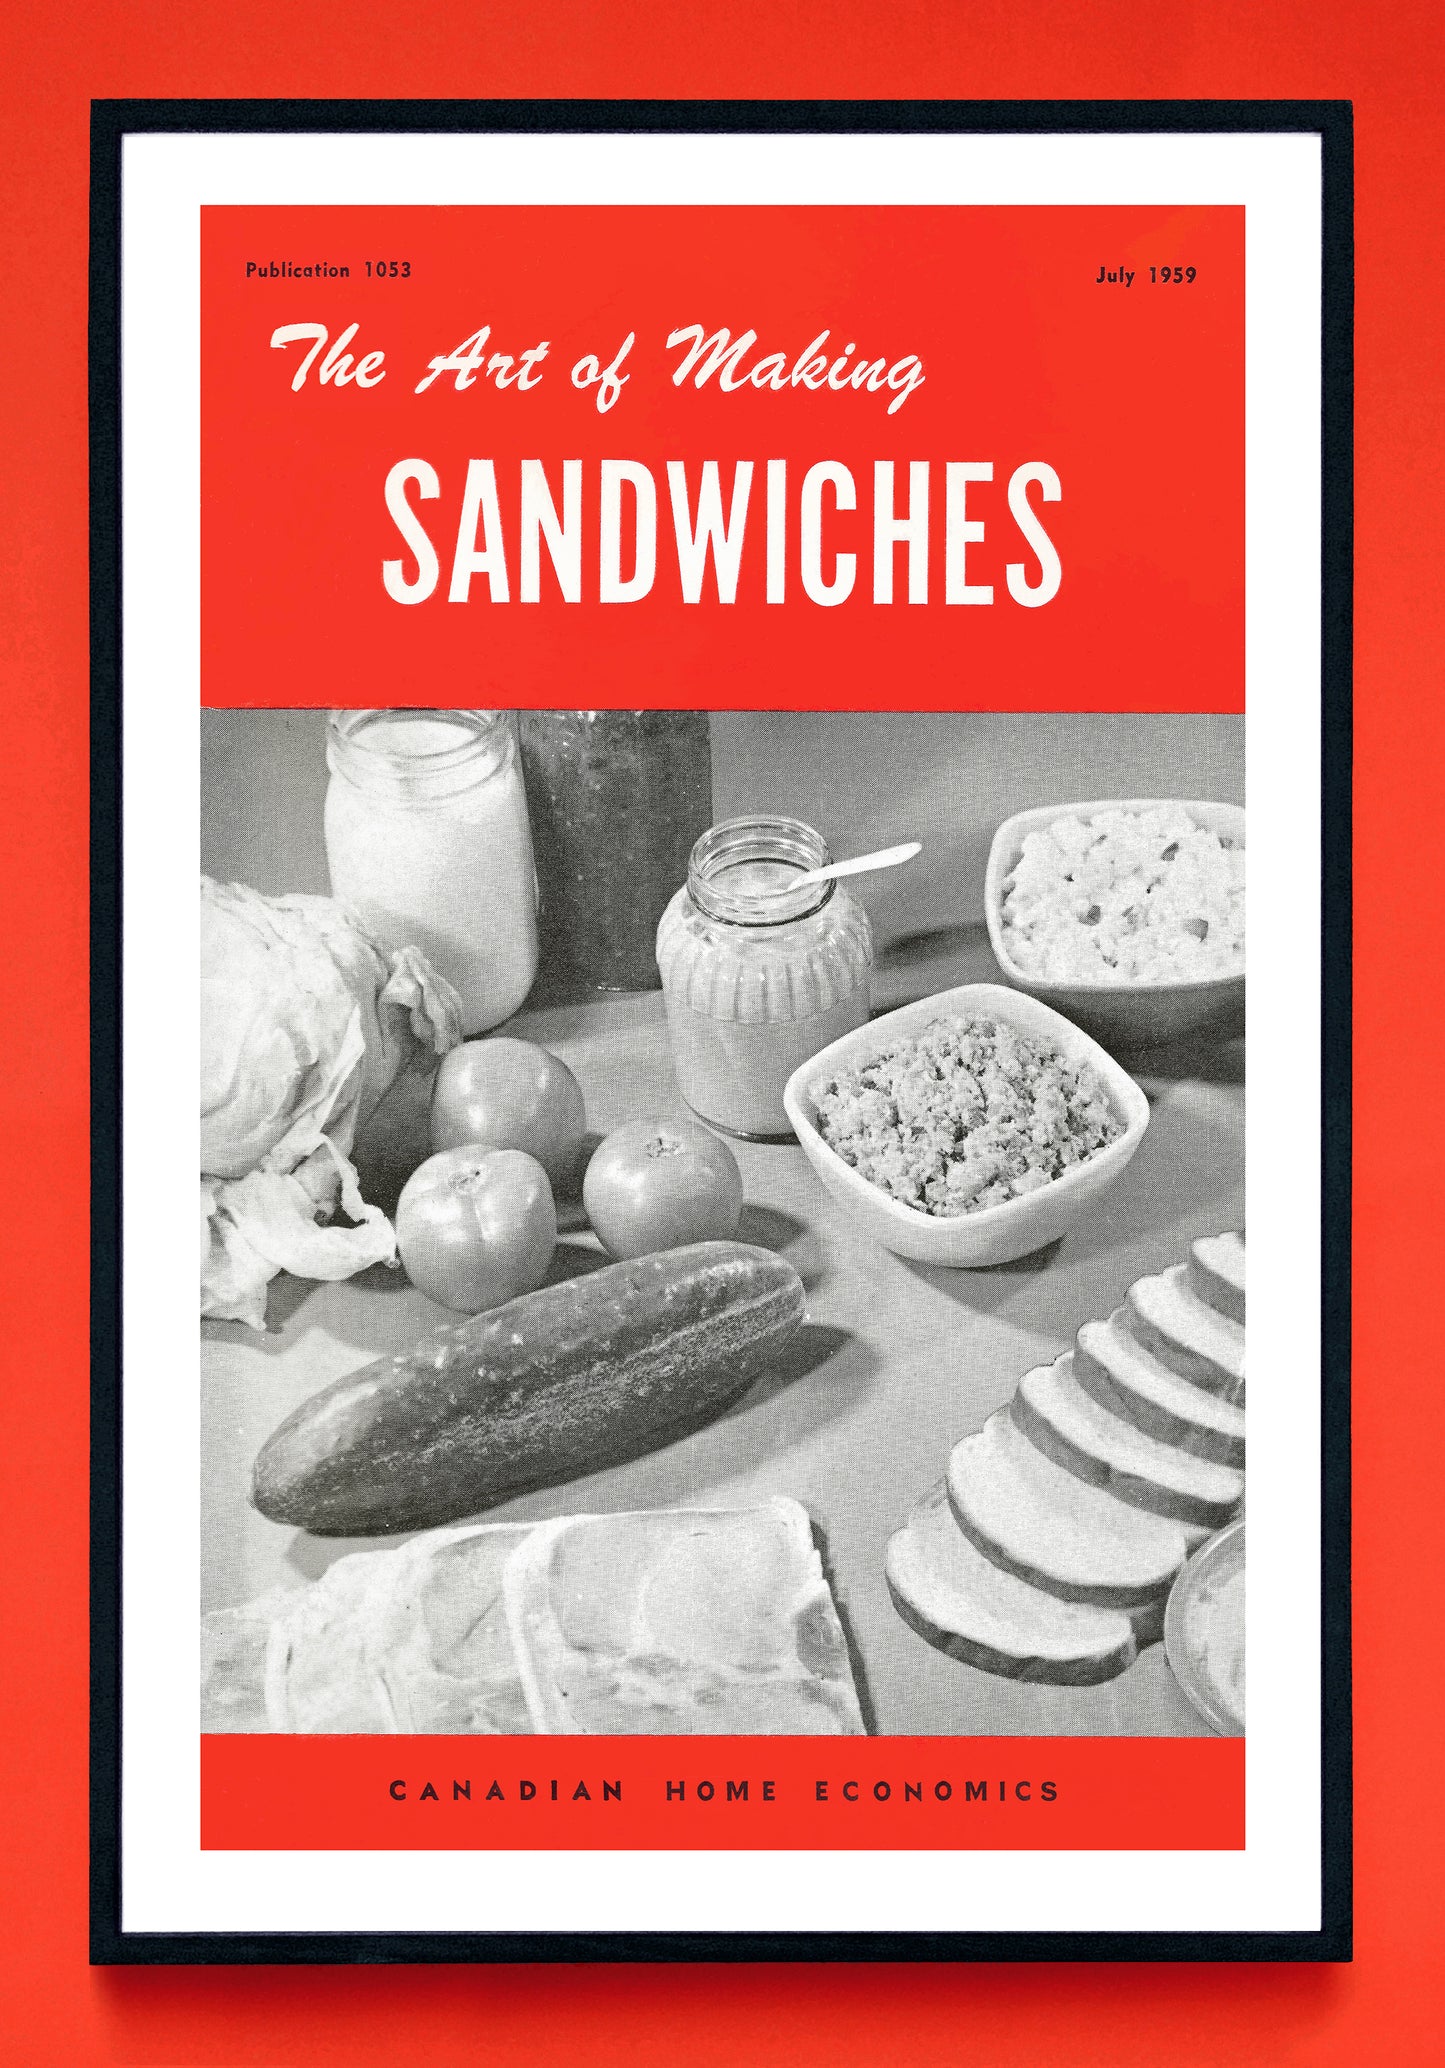 "The Art of Making Sandwiches" print (1959)